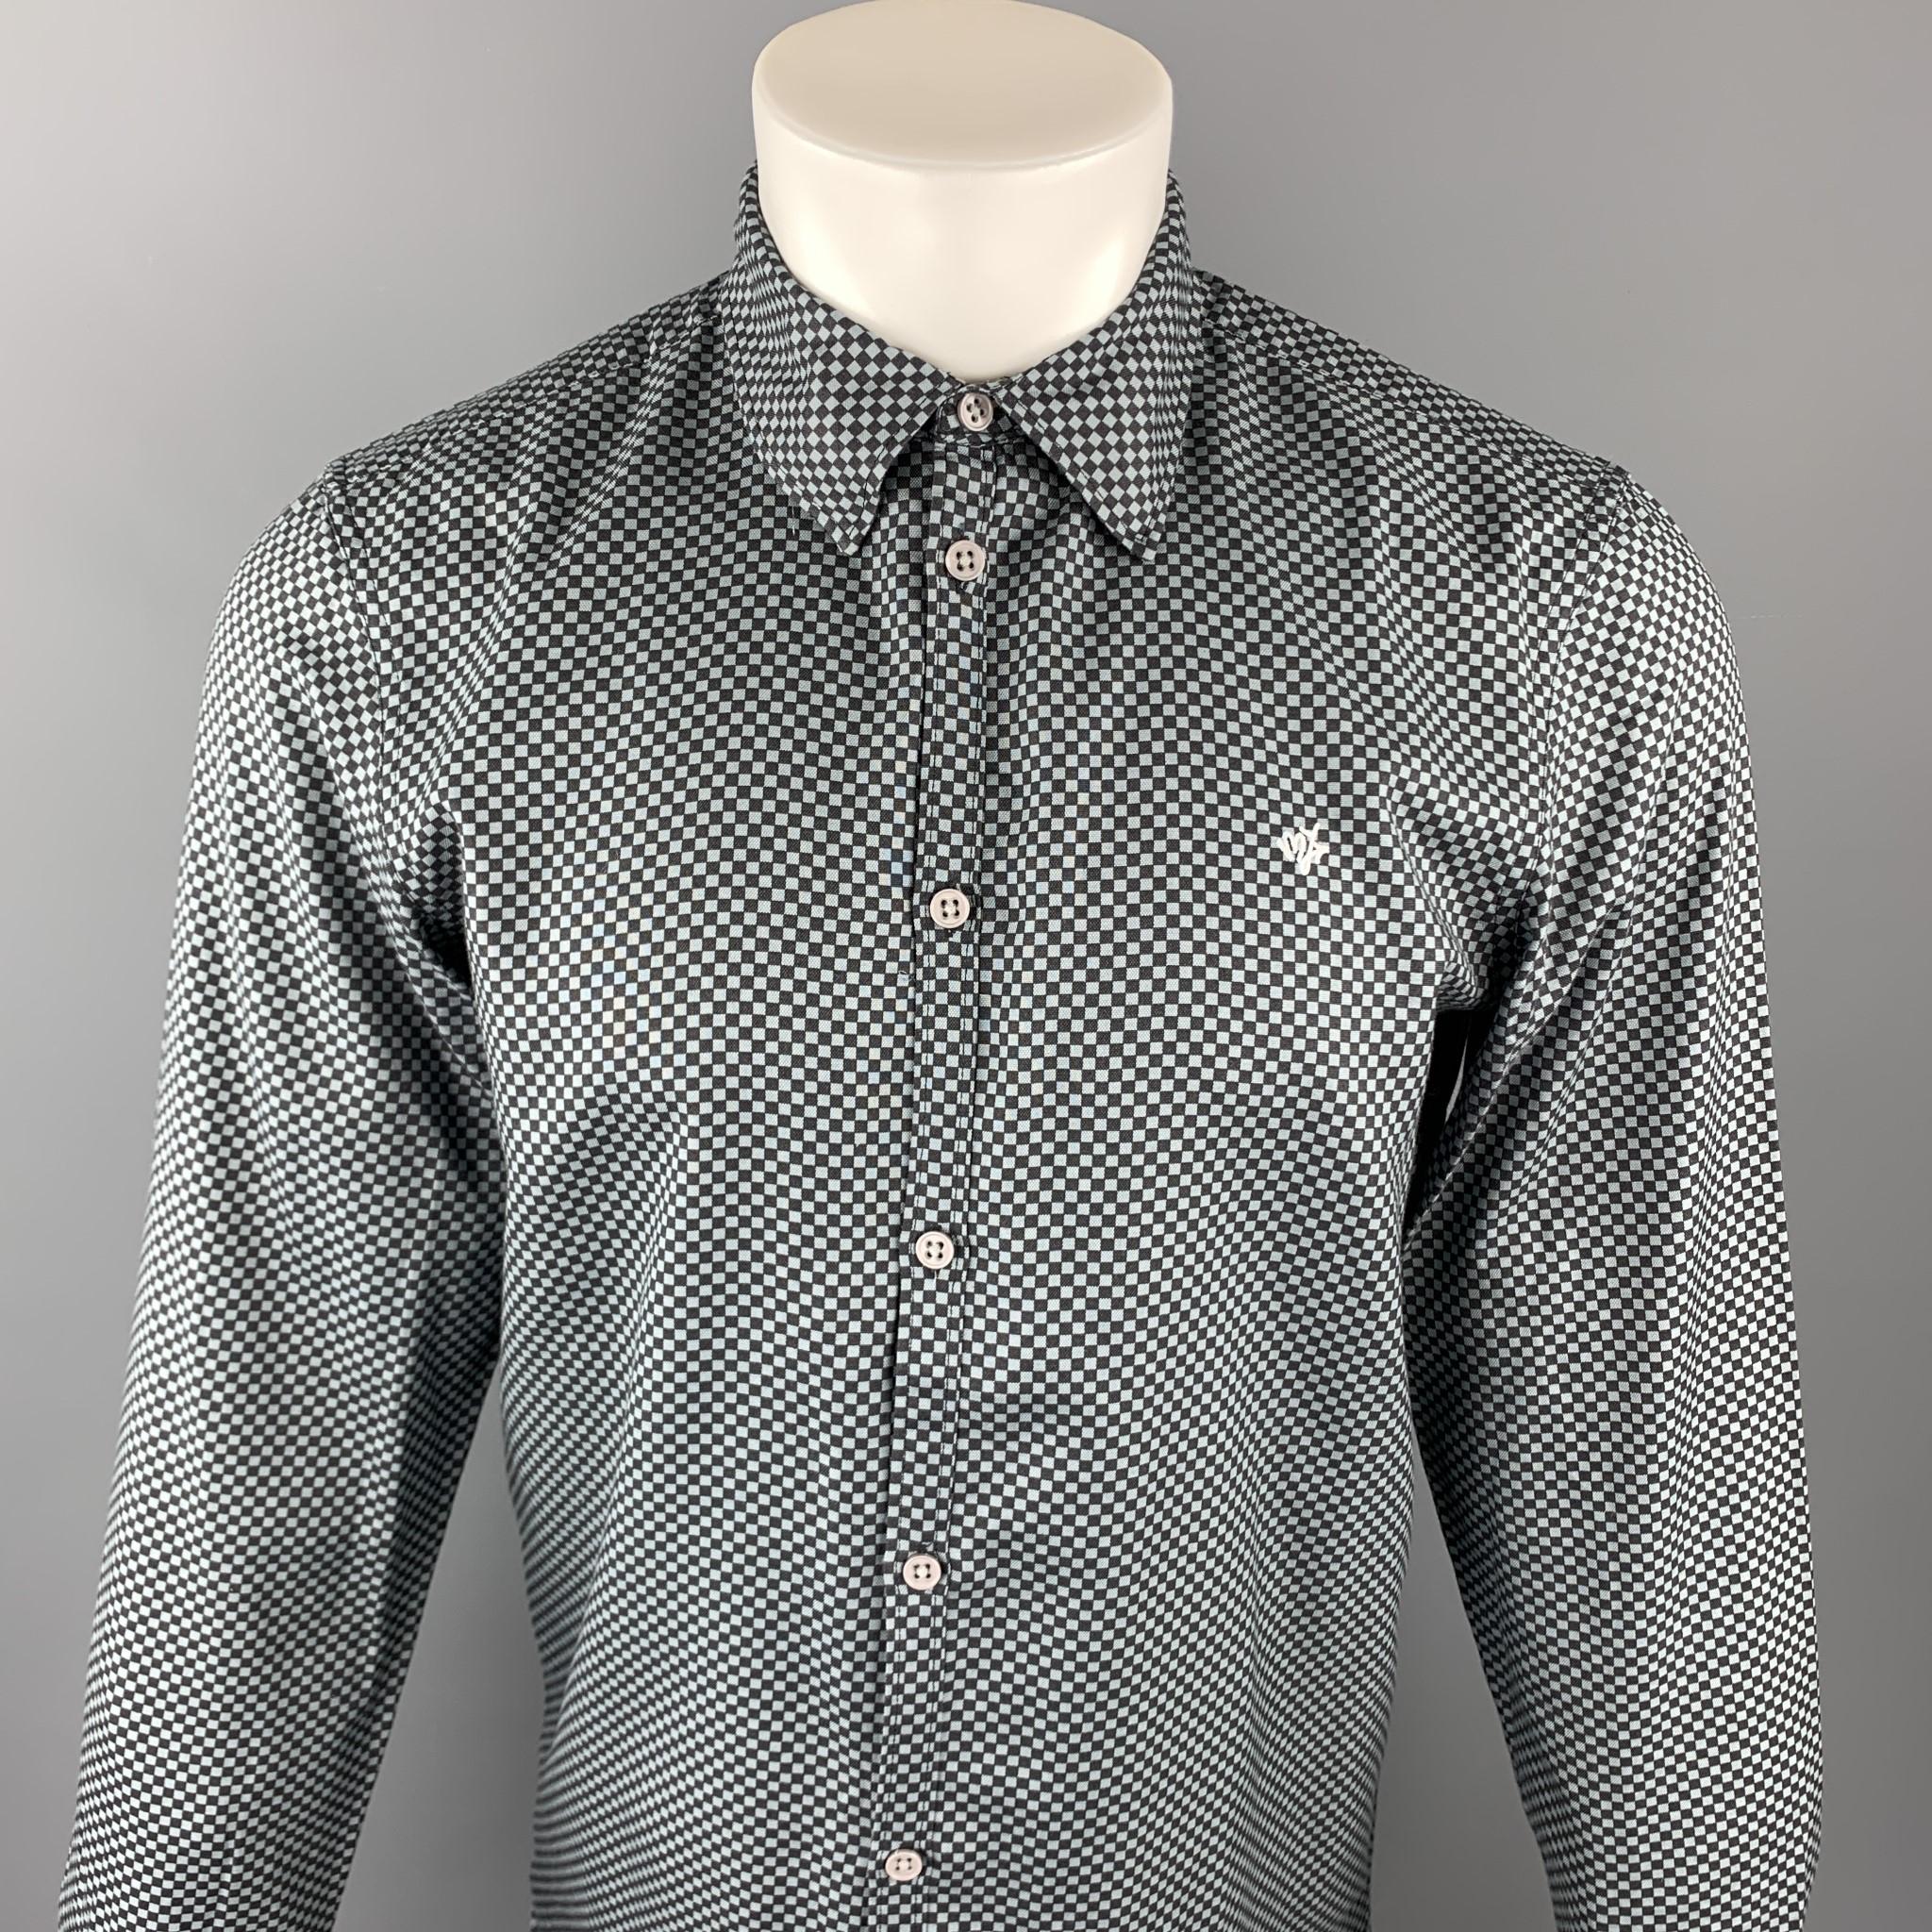 MARC by MARC JACOBS long sleeve shirt comes in a black and gray checkered cotton featuring a button up style and a front embroidery detail. 

Excellent Pre-Owned Condition. 
Marked: S

Measurements:

Shoulder: 16.5 in. 
Chest: 40 in. 
Sleeve: 27 in.